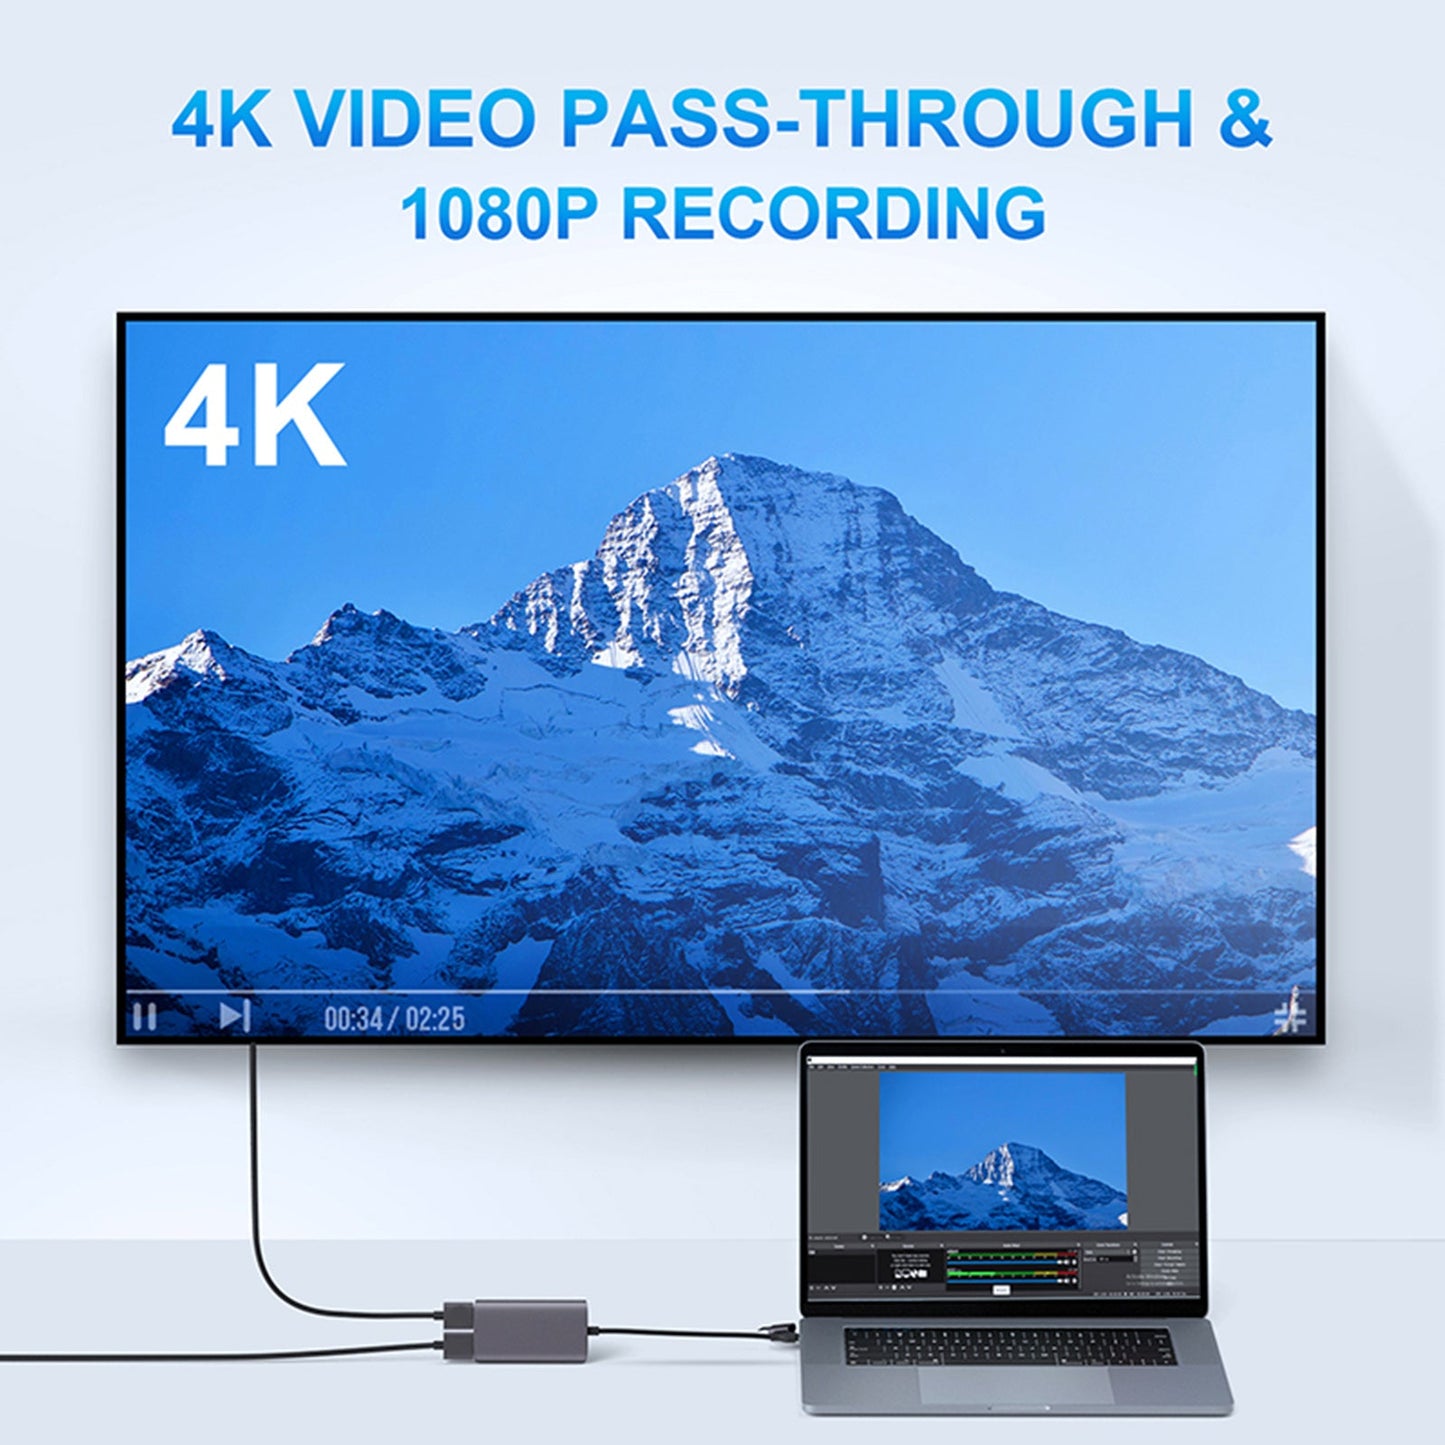 1080P60fps Video Capture Card HDMI to 4K HDMI Loop-out USB3.0 Type-C Grabber